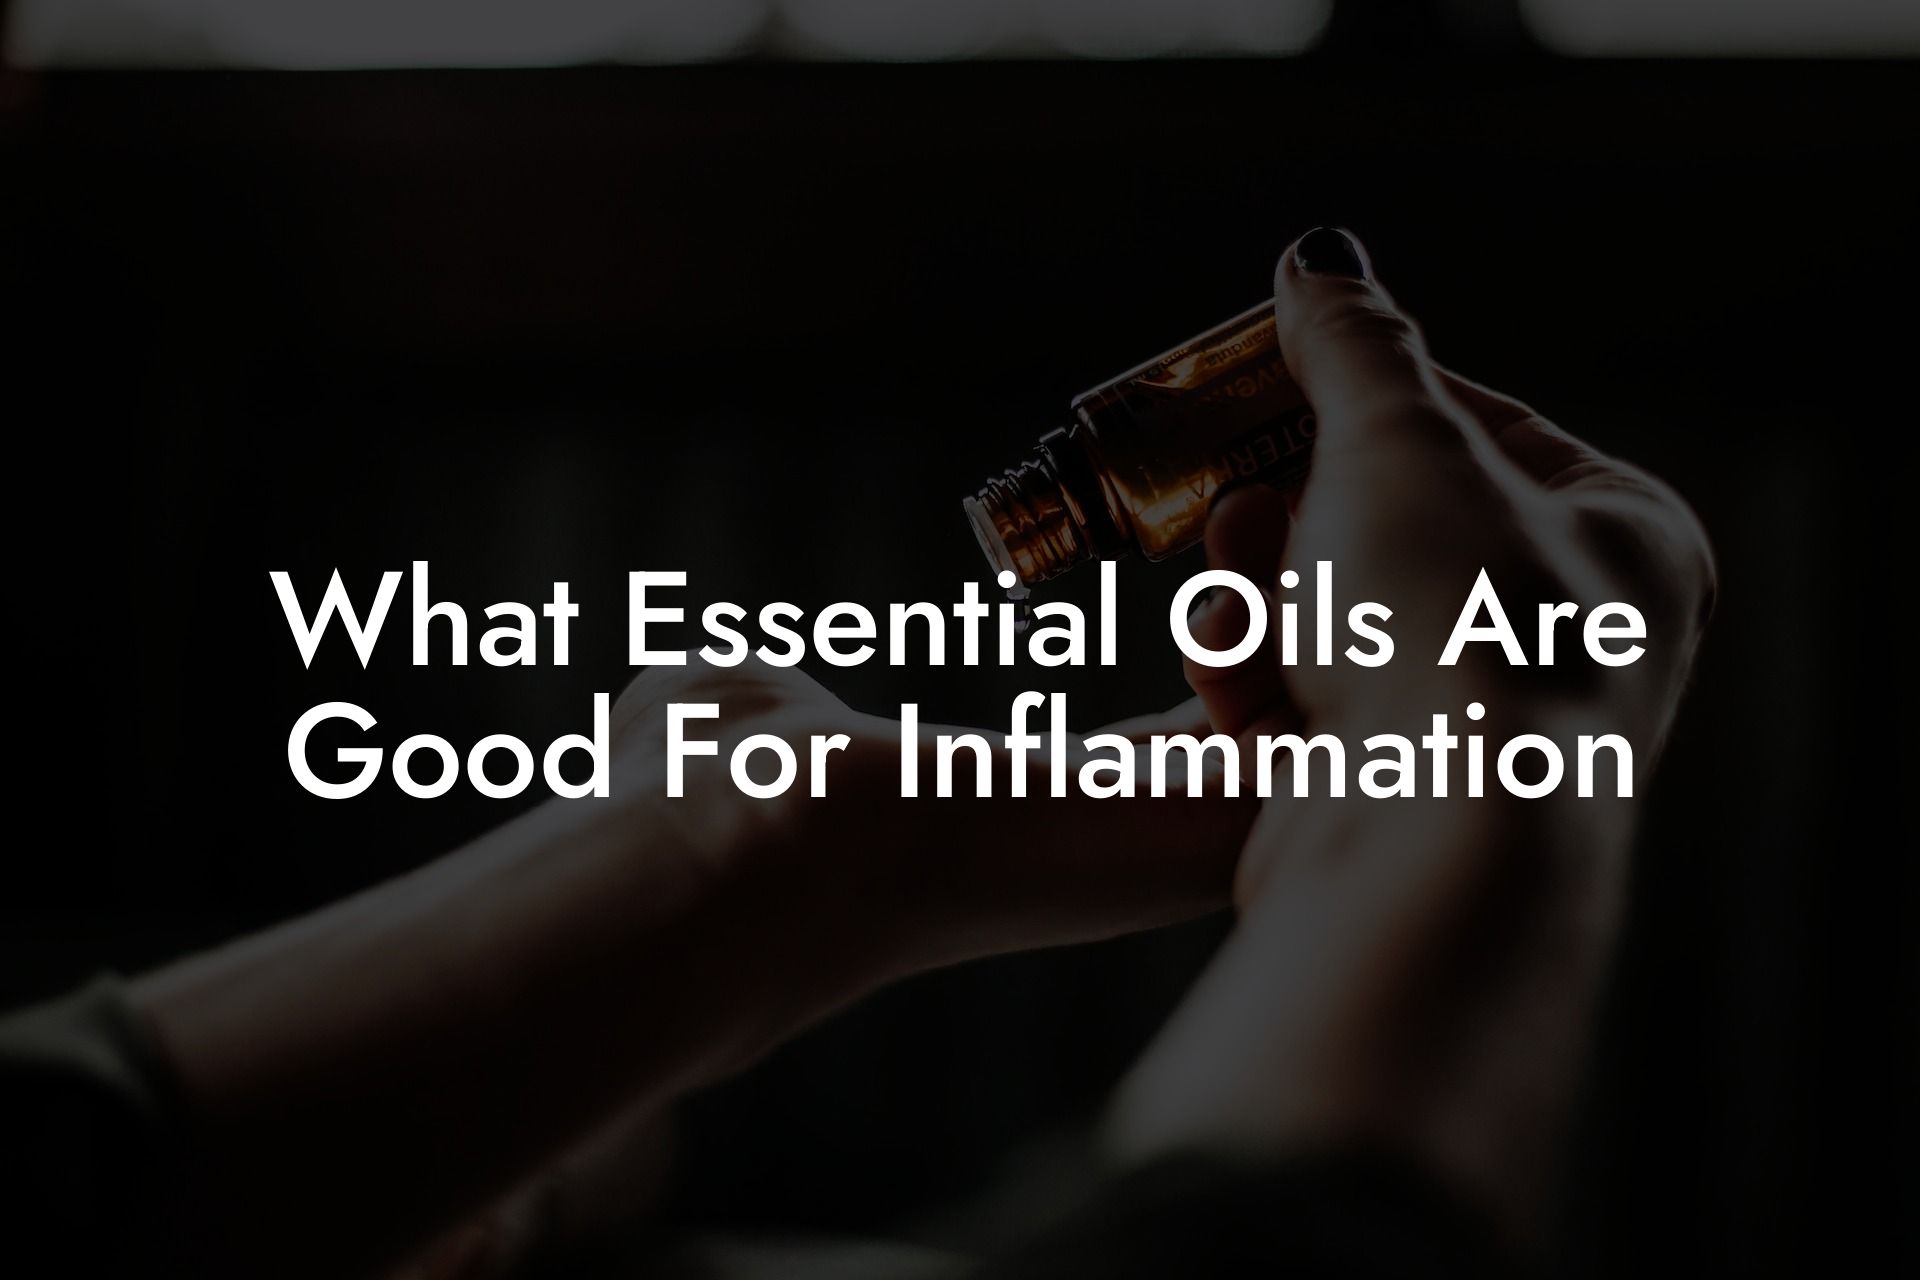 What Essential Oils Are Good For Inflammation